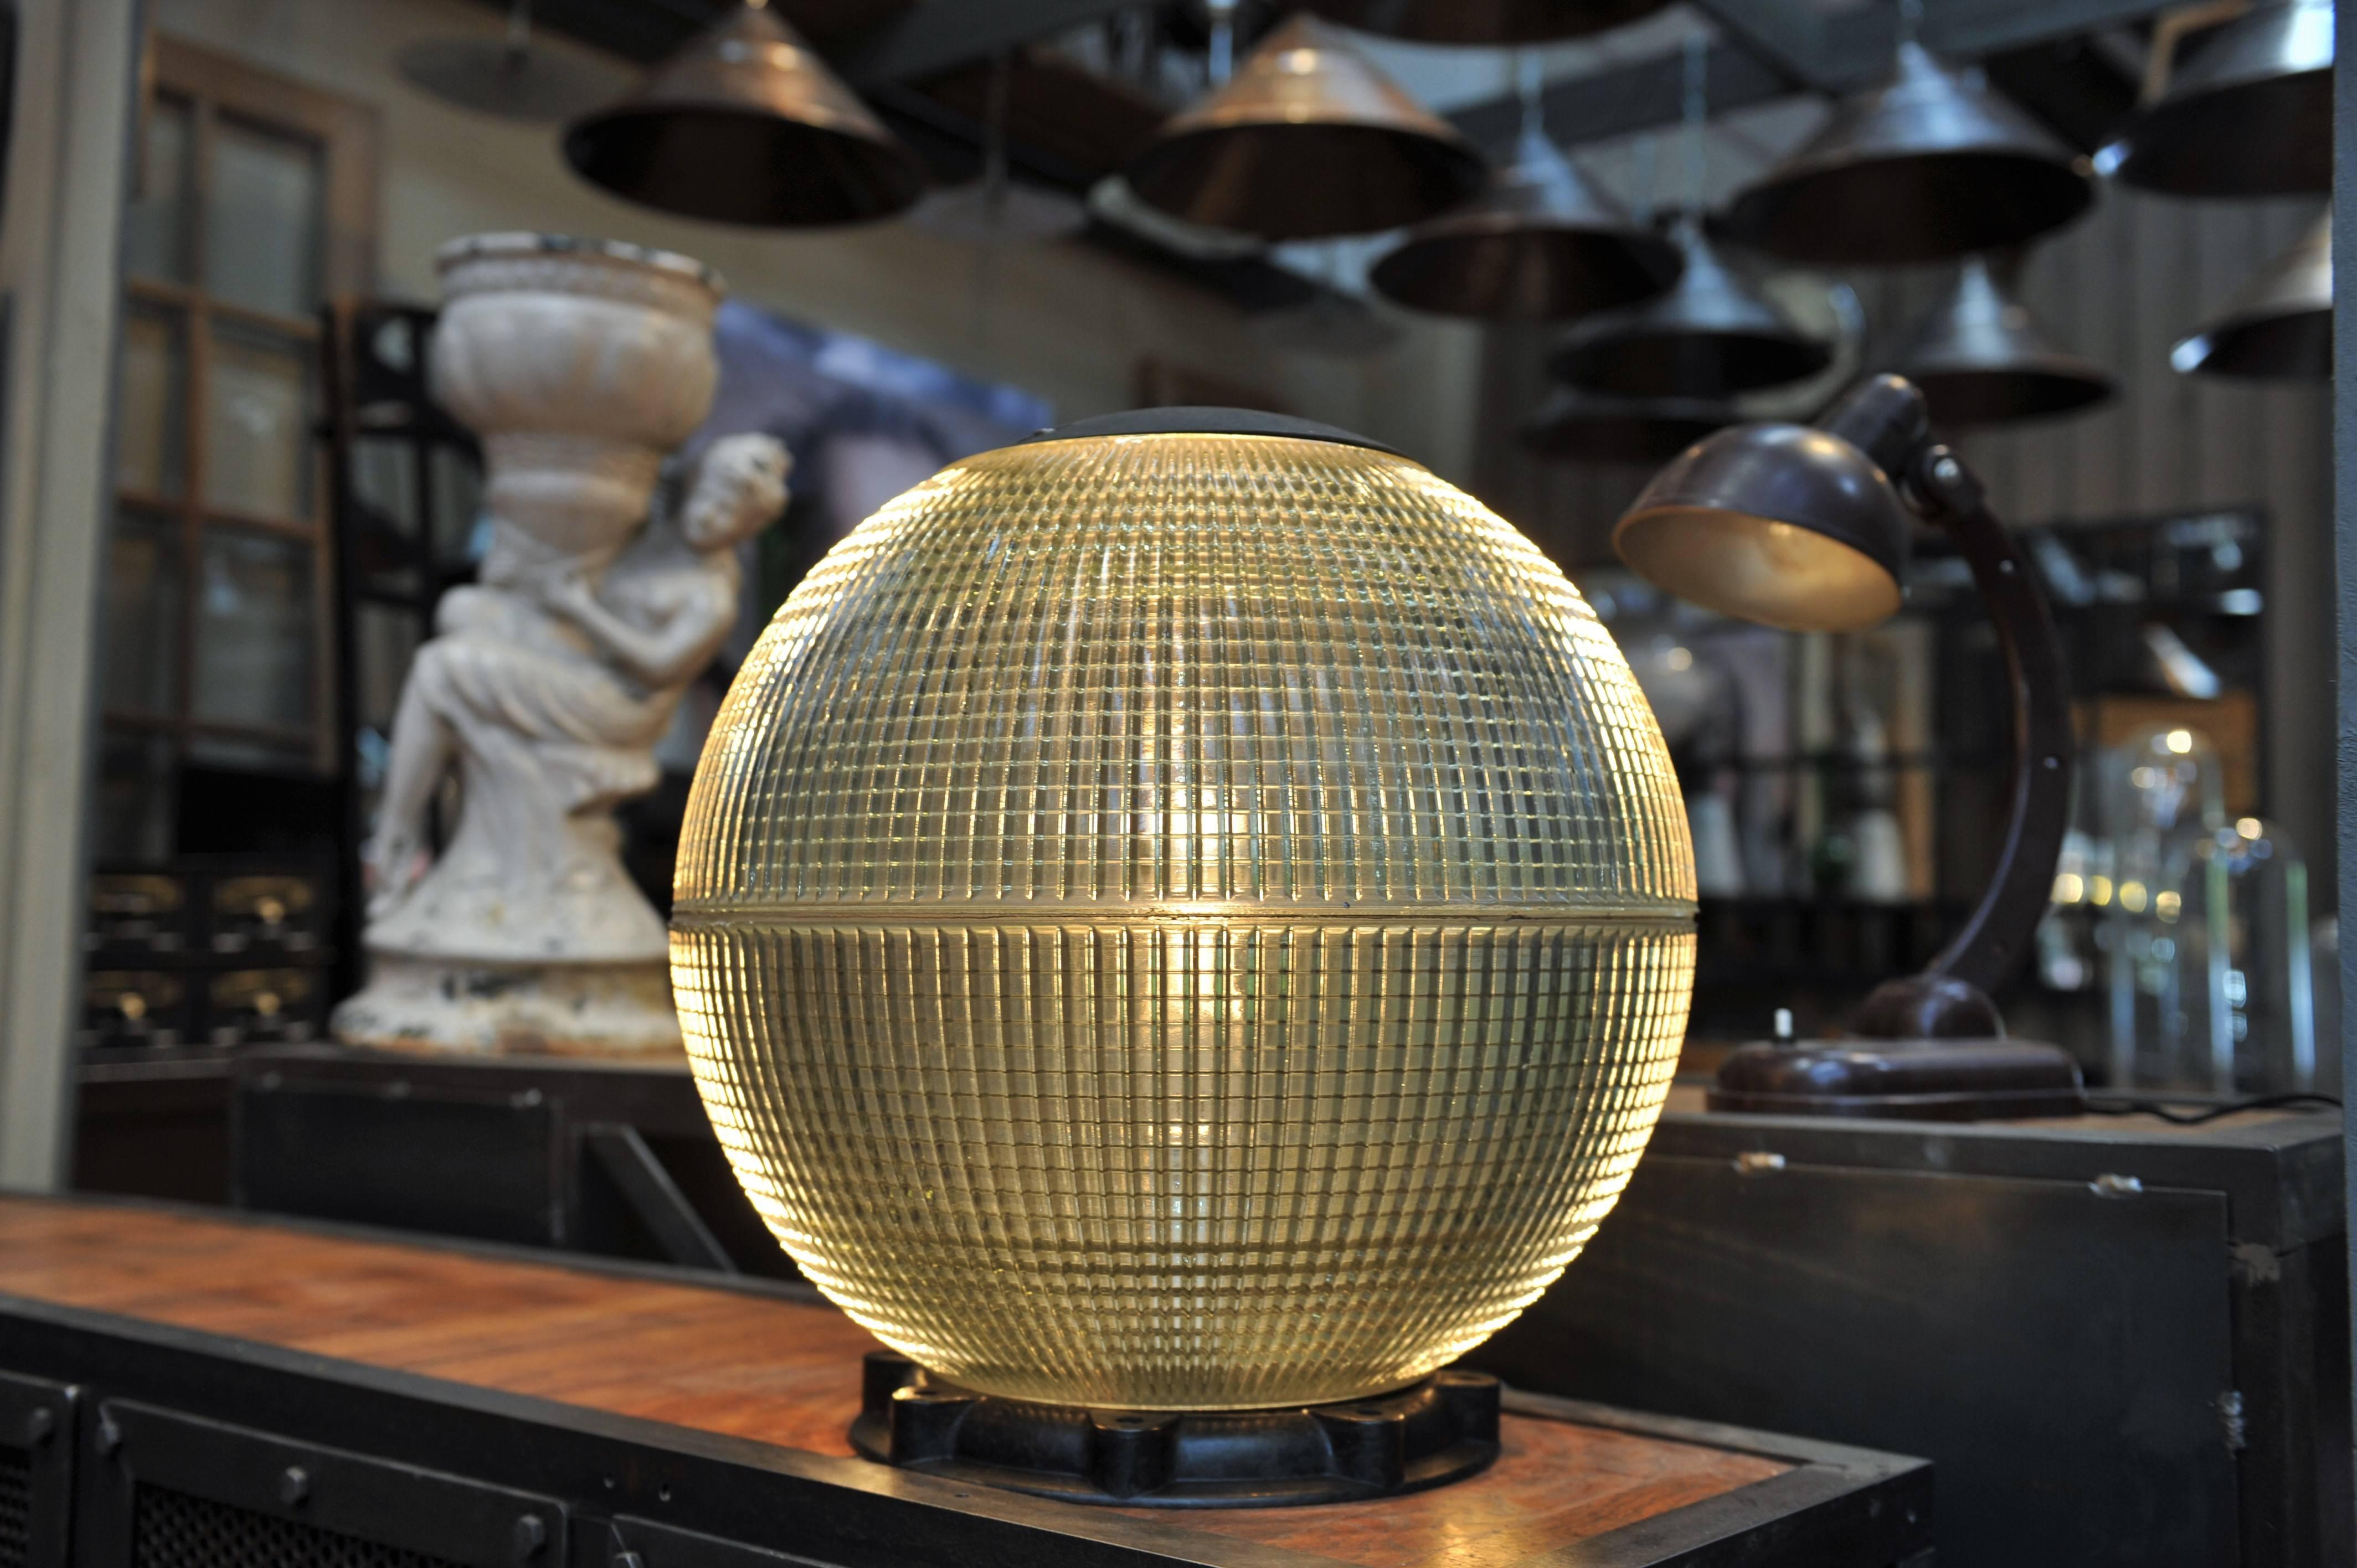 Large original Parisian Holophane glass ball street light turned into desk or table Light Rewired E27 with power modulator and stabile base. 